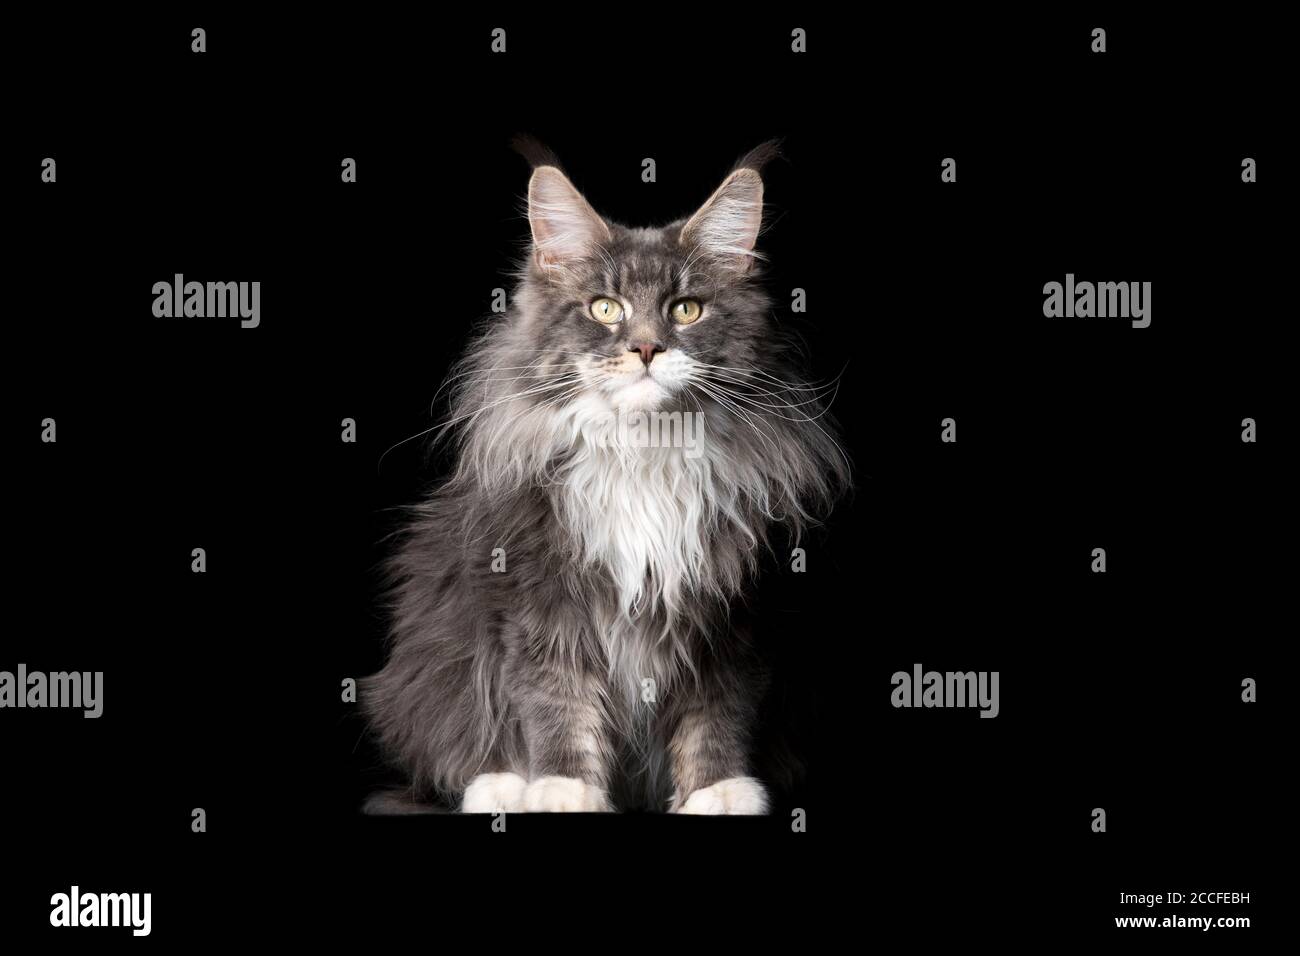 studio portrait of a fluffy blue tabby white maine coon cat looking at camera isolated on black background with copy space Stock Photo